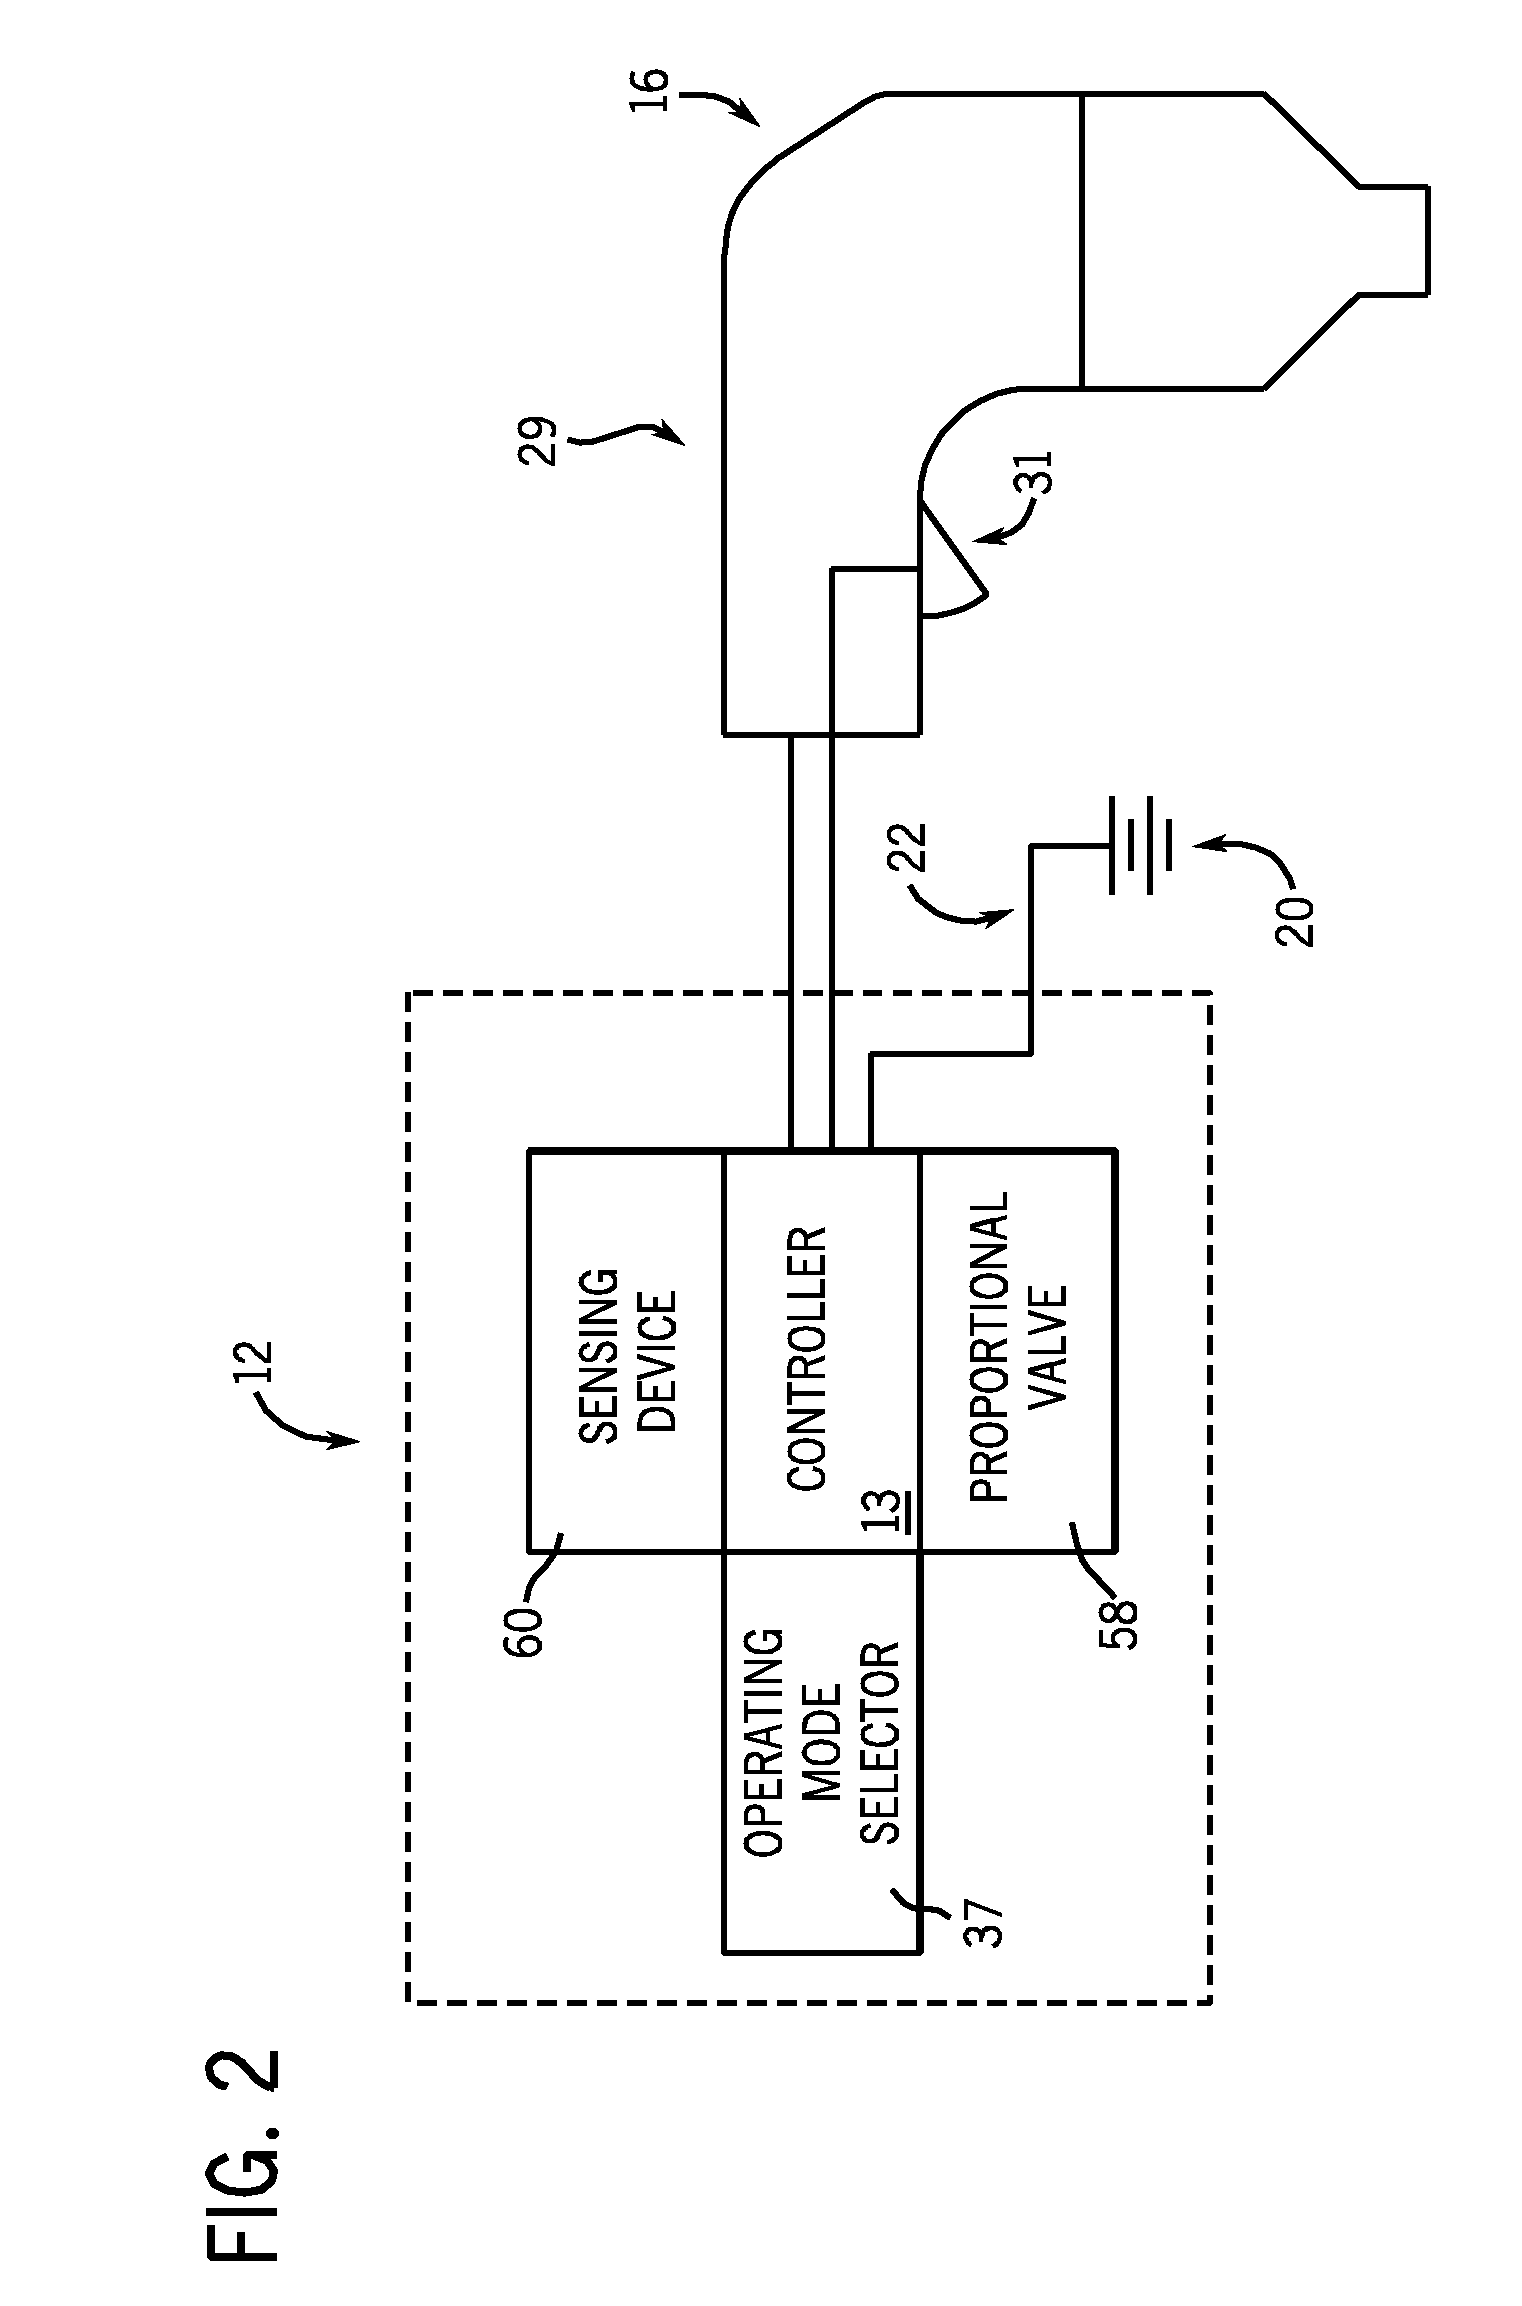 Method and apparatus for high power density plasma cutting system